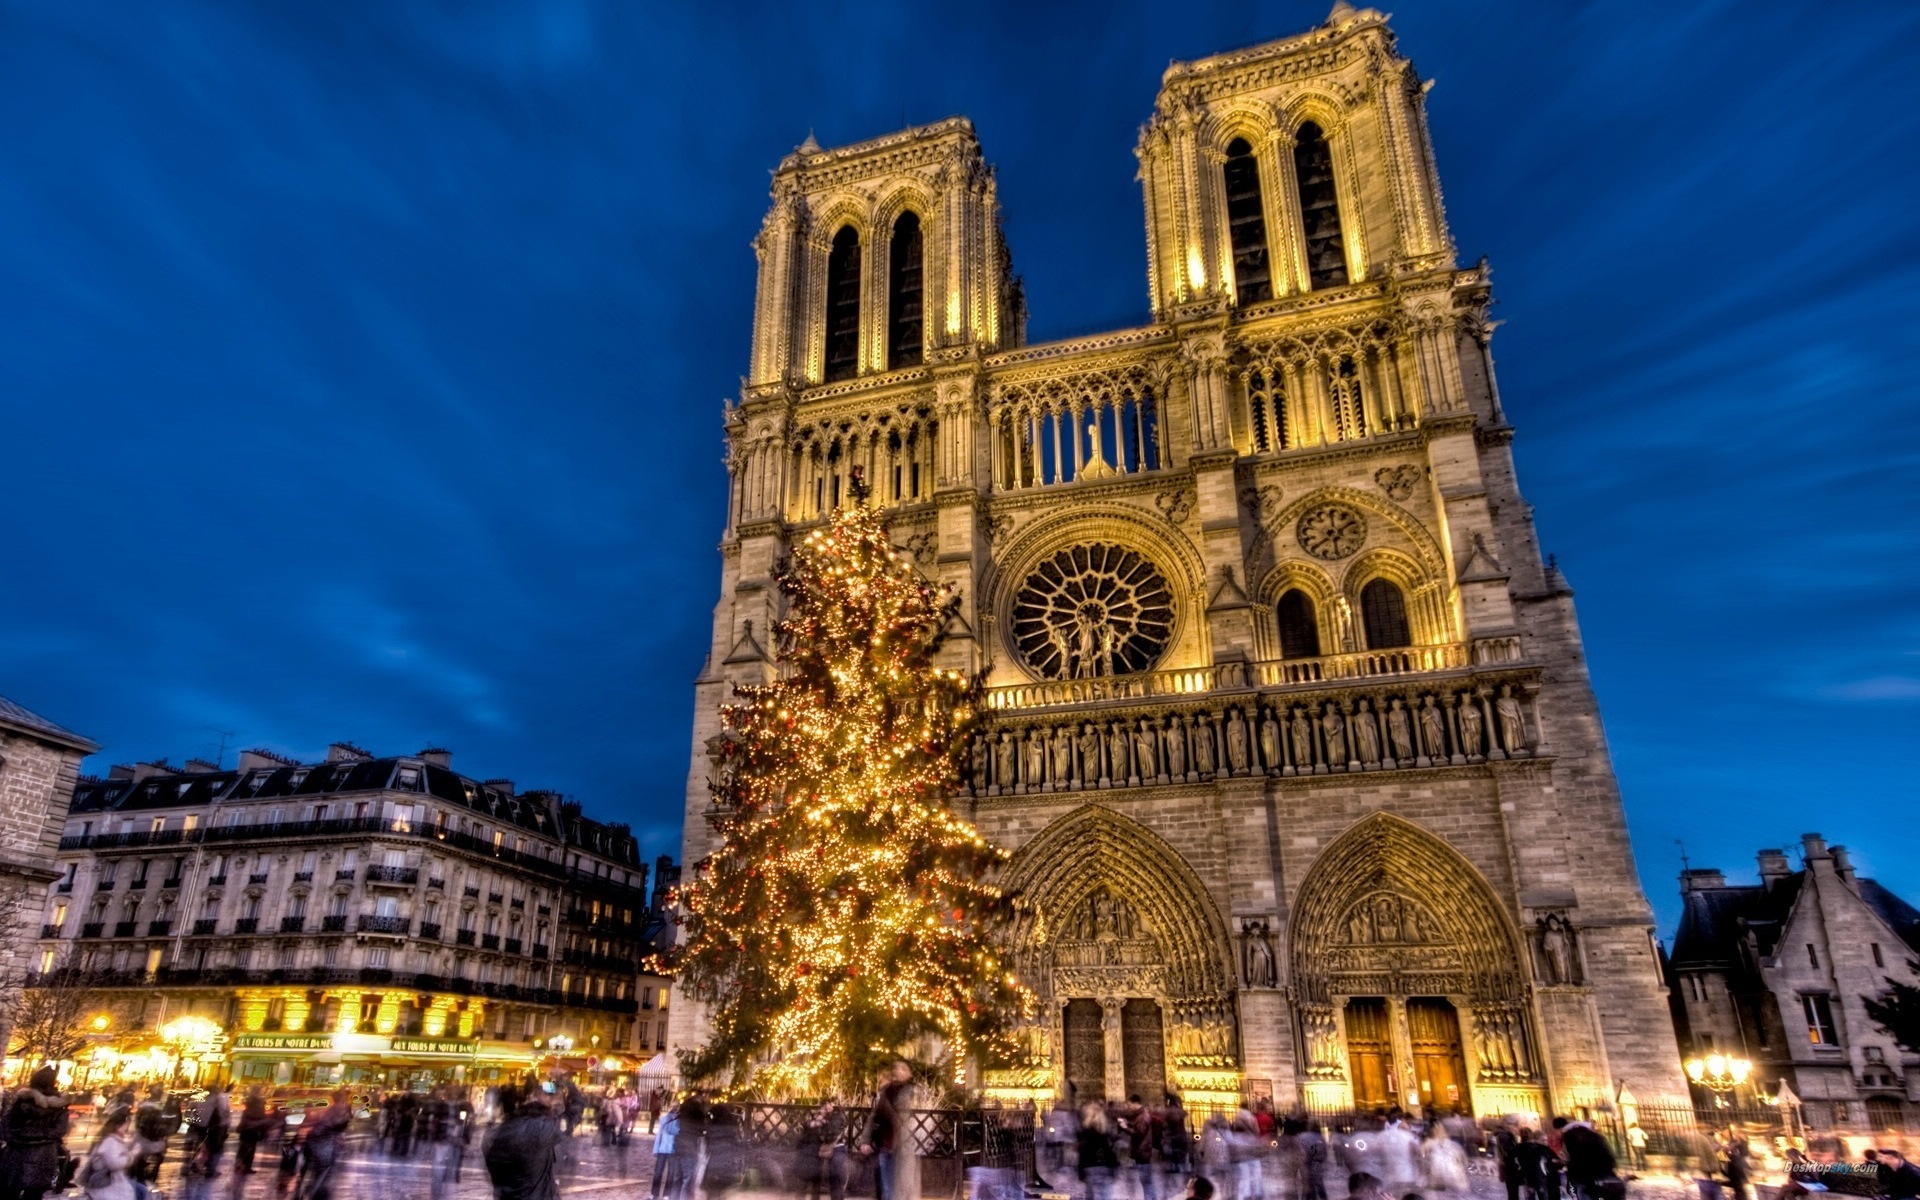 Notre Dame HD Wallpapers #7 - 1920x1200